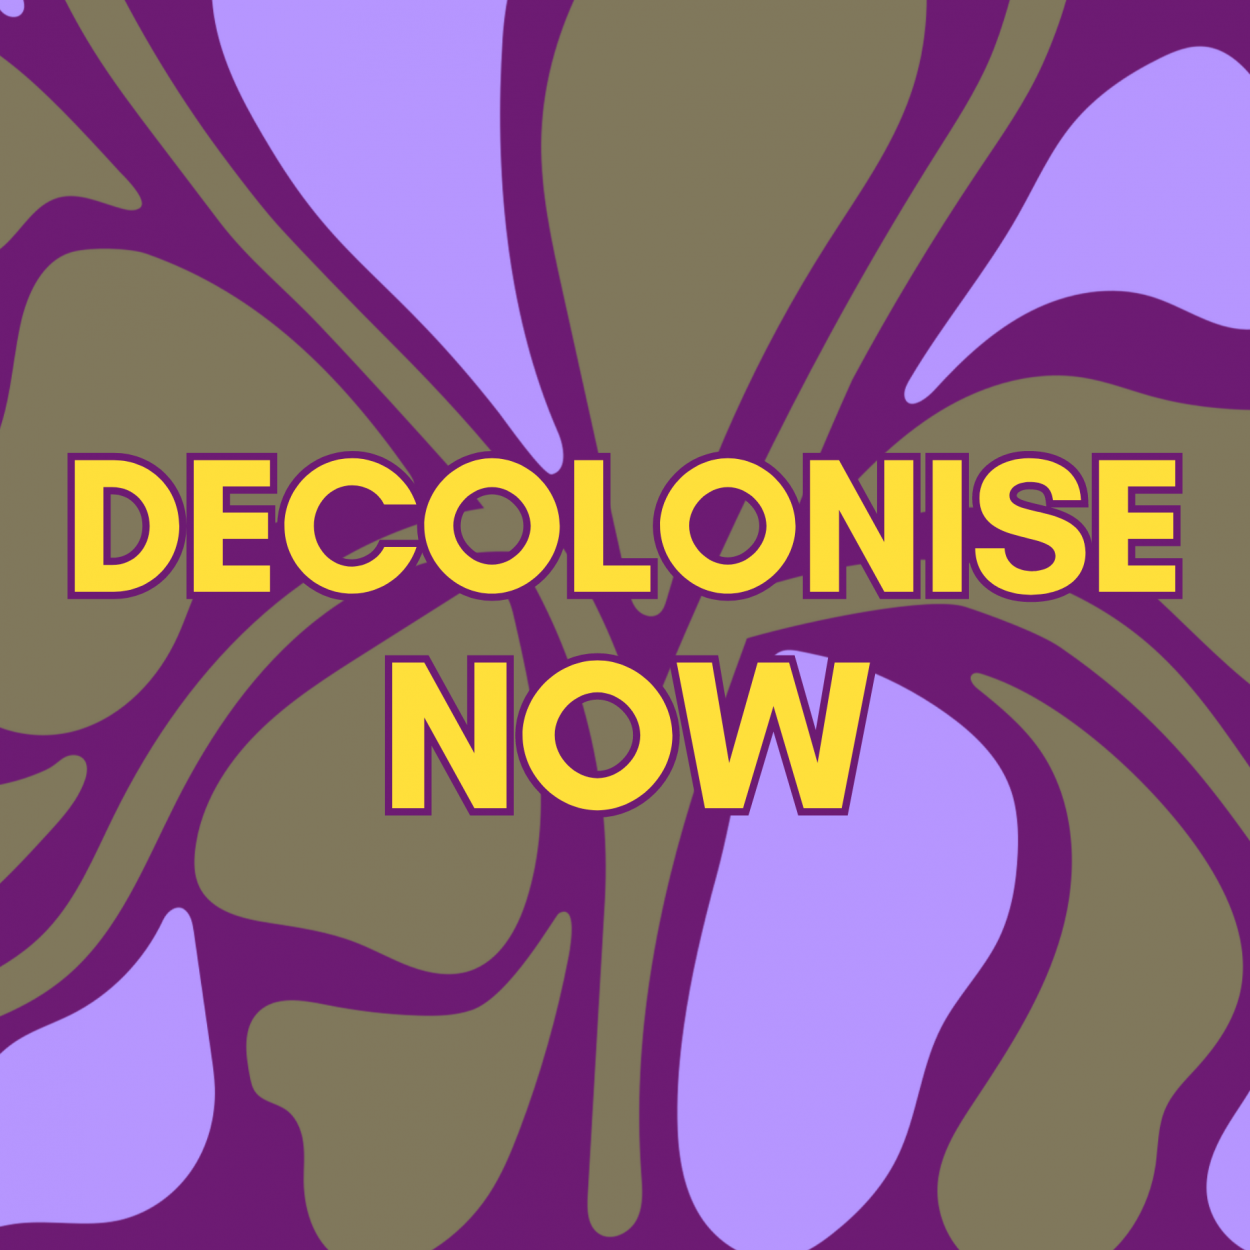 Decolonise now text on patterned background